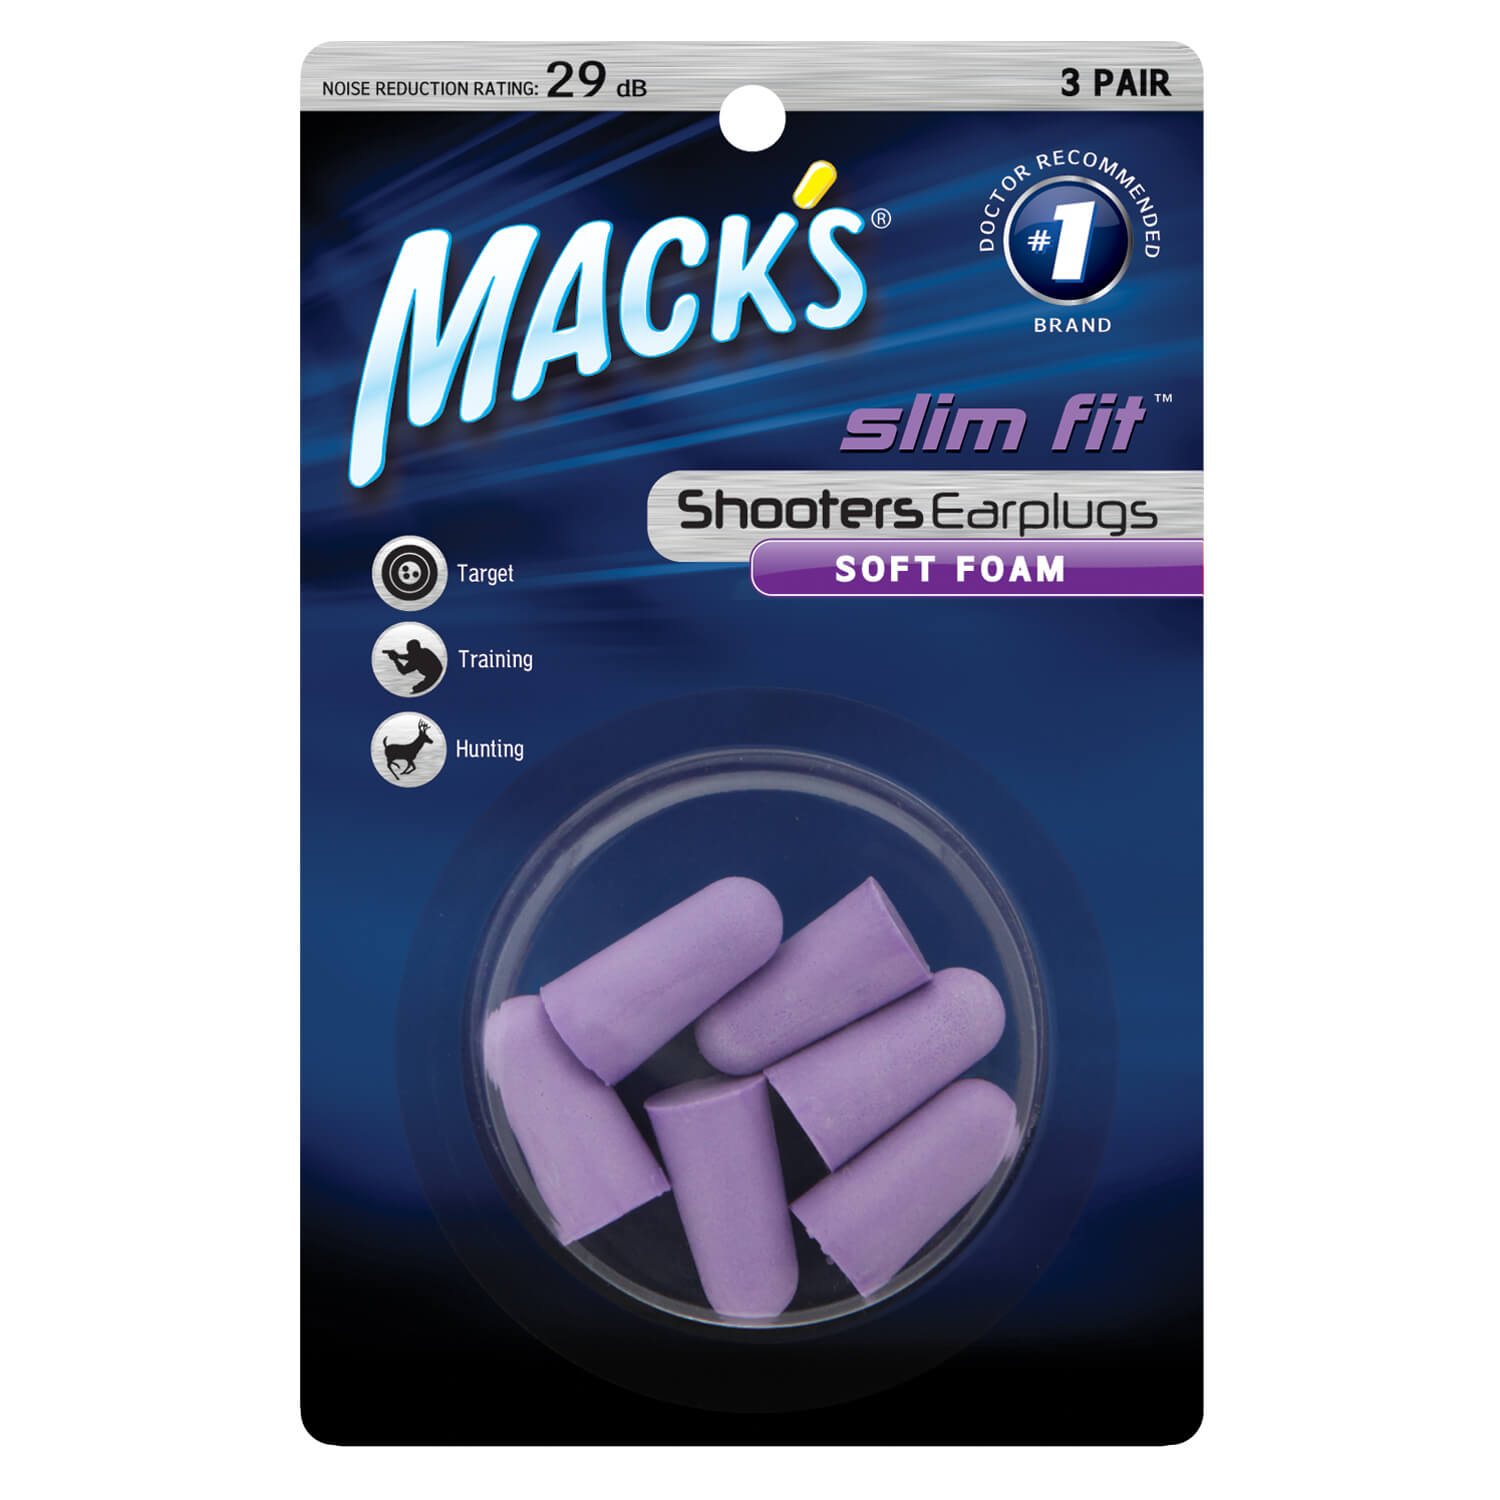 macks earplugs slim fit soft foam ear plugs for shooting and small ear canals to help block out noise are best ear plugs for noise cancelling and best purple ear plugs for sleeping